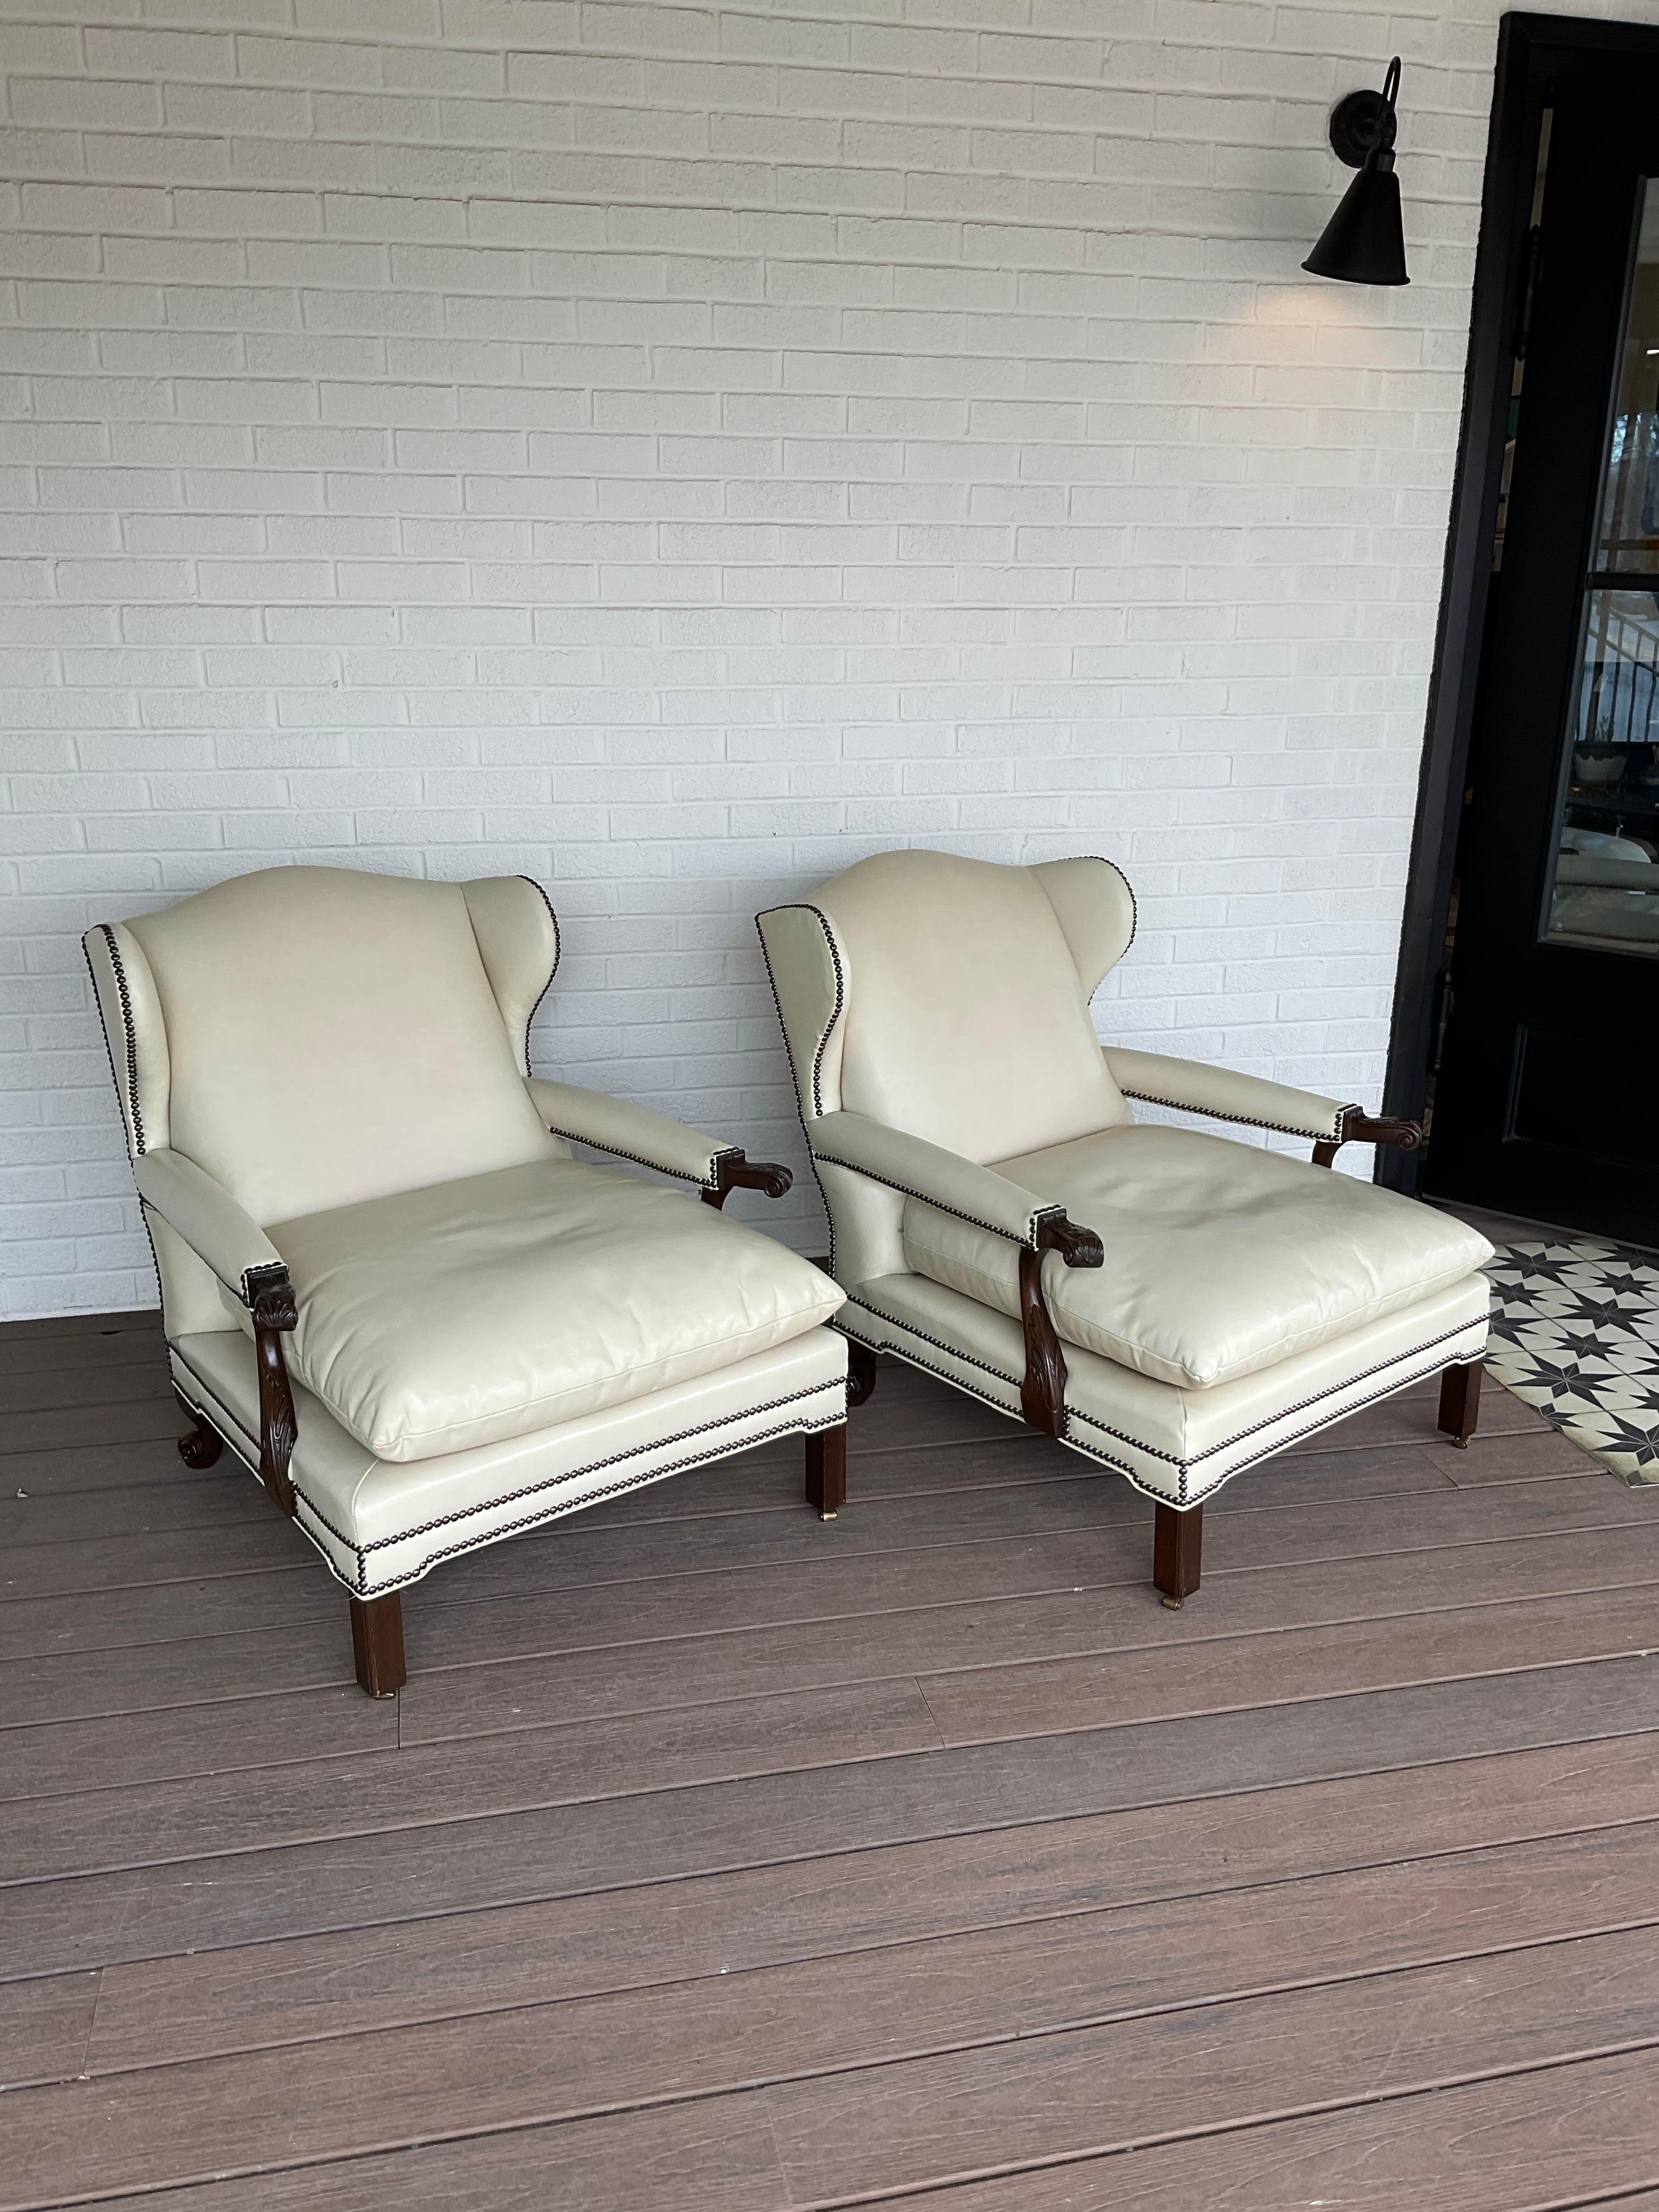 1990s Vintage Leather Club Chairs from Hickory Furniture  6